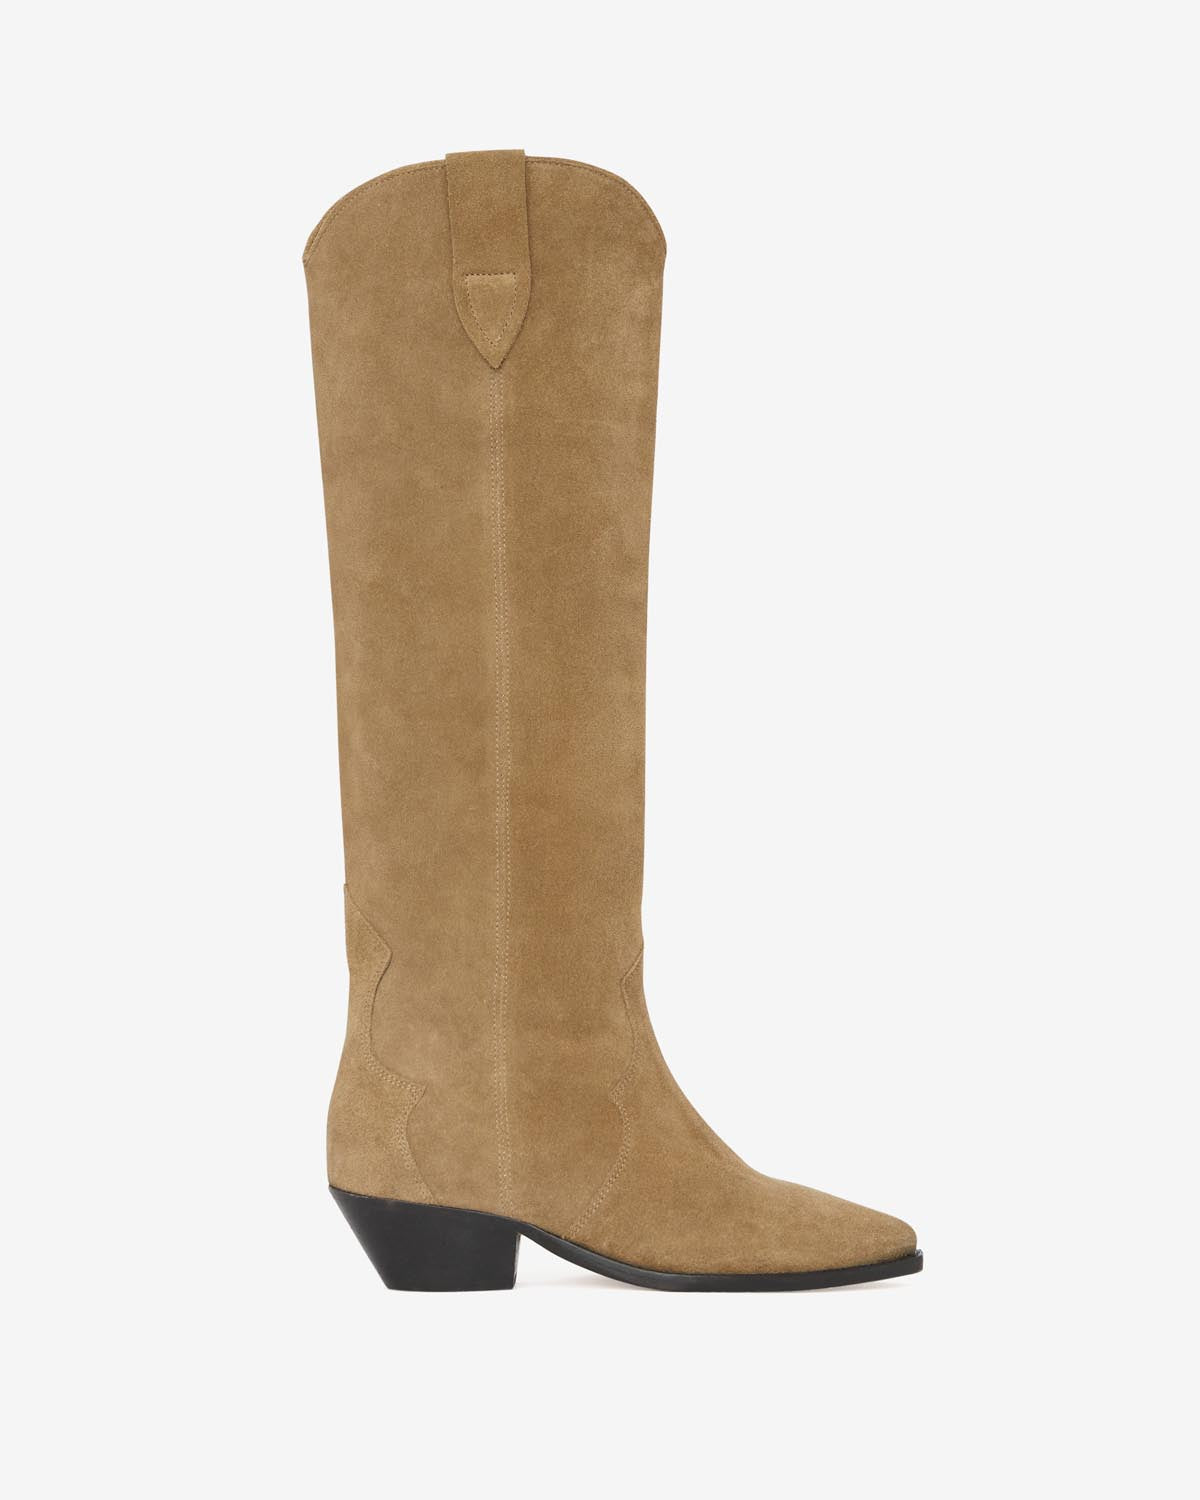 Denvee boots Woman Taupe 8